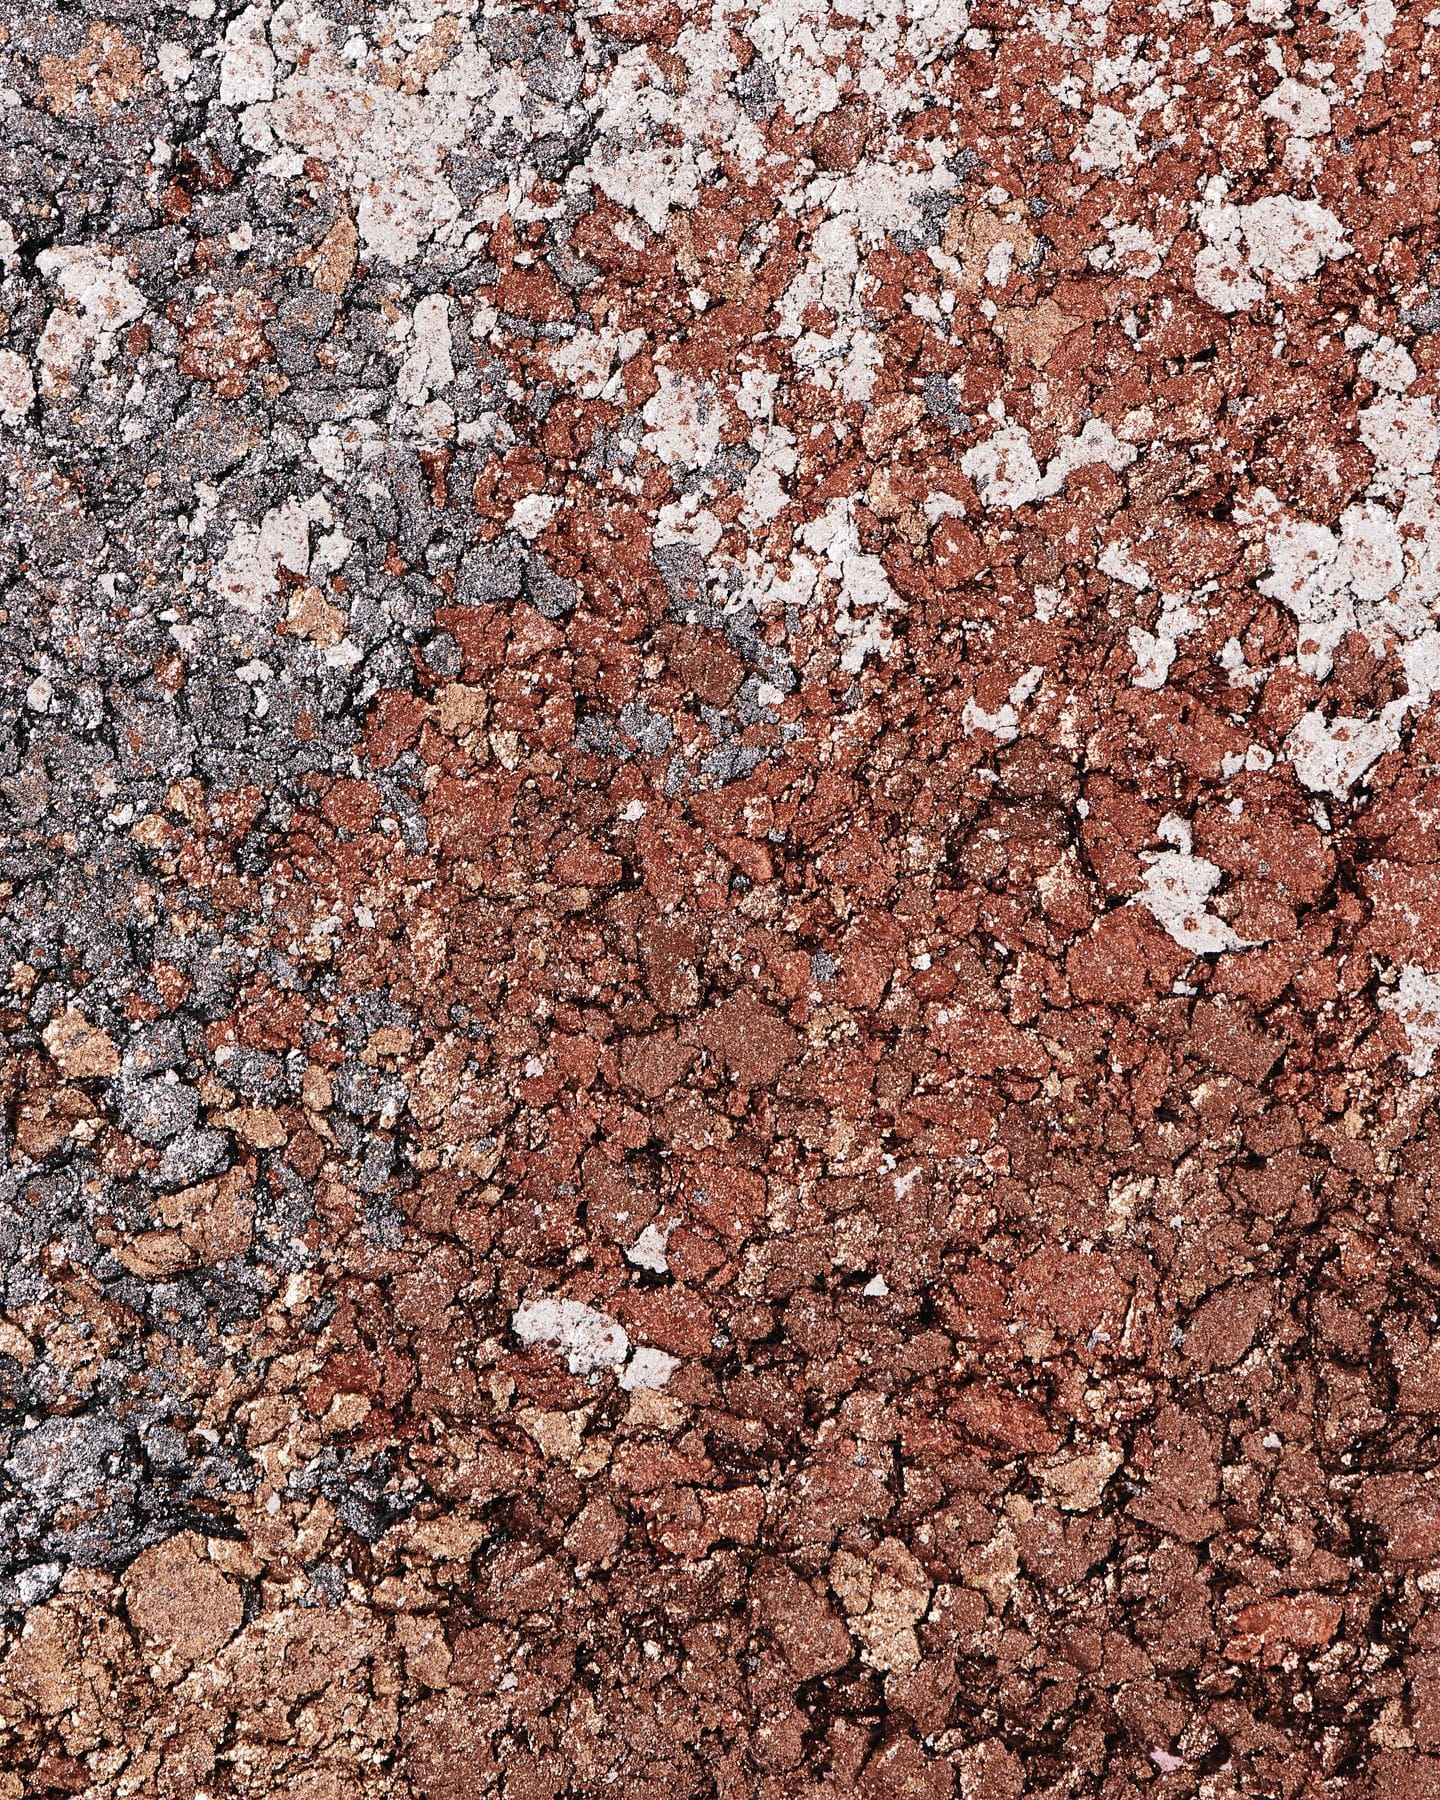 Close up of soil and stone texture